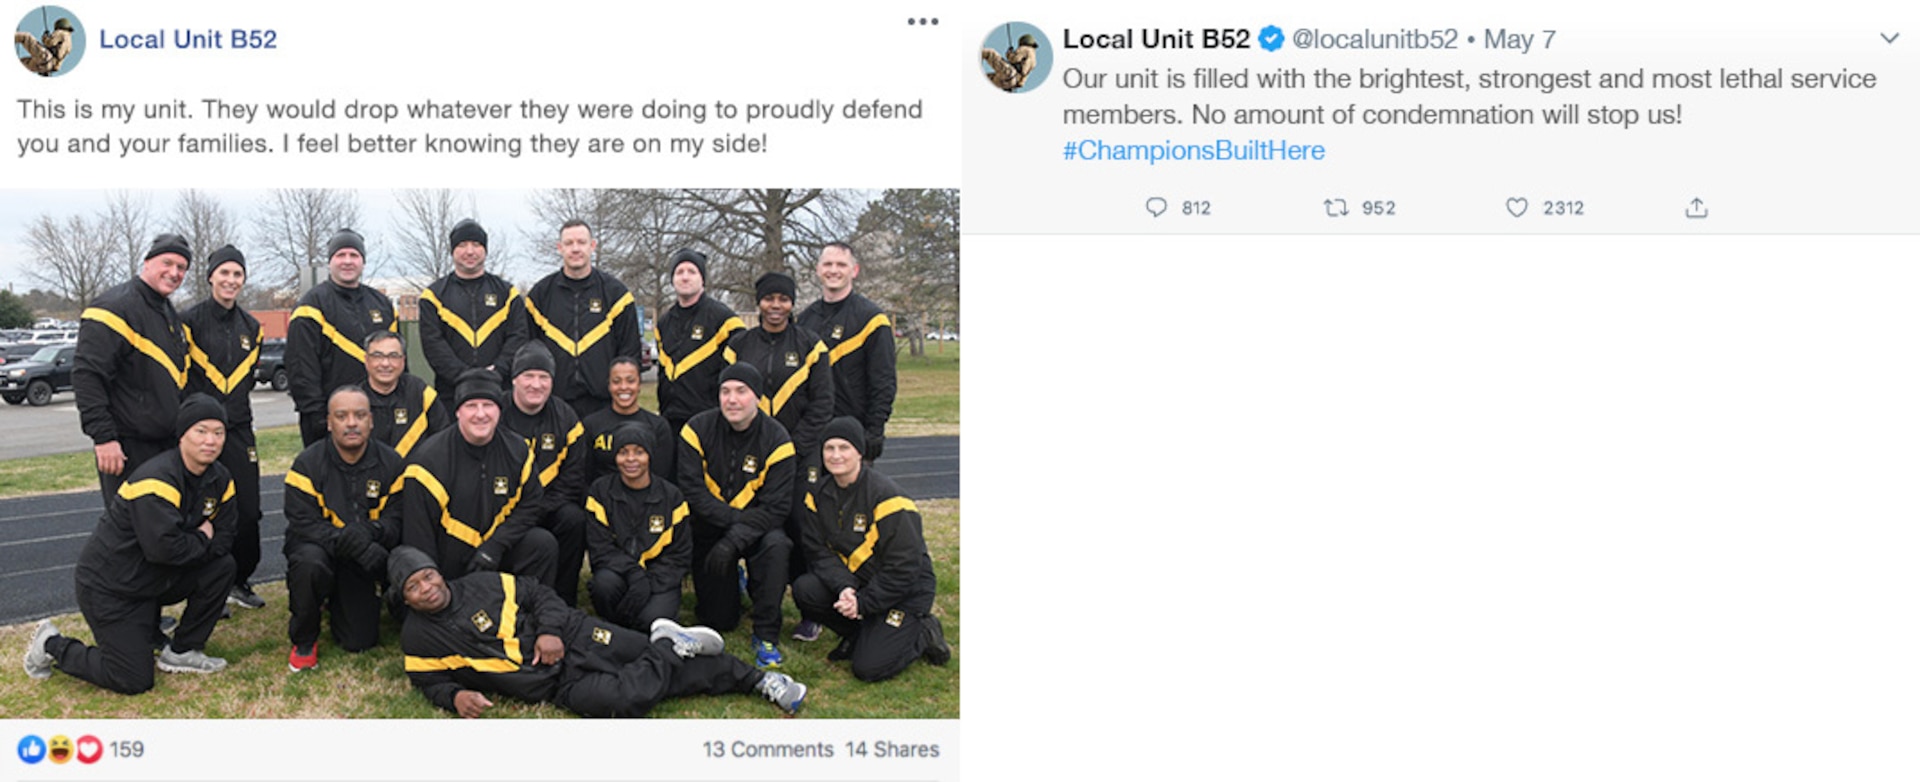 Image of a positive Tweet from a local unit with a picture of multiple service members posing for a picture. There is another image of an additional Tweet with another response.